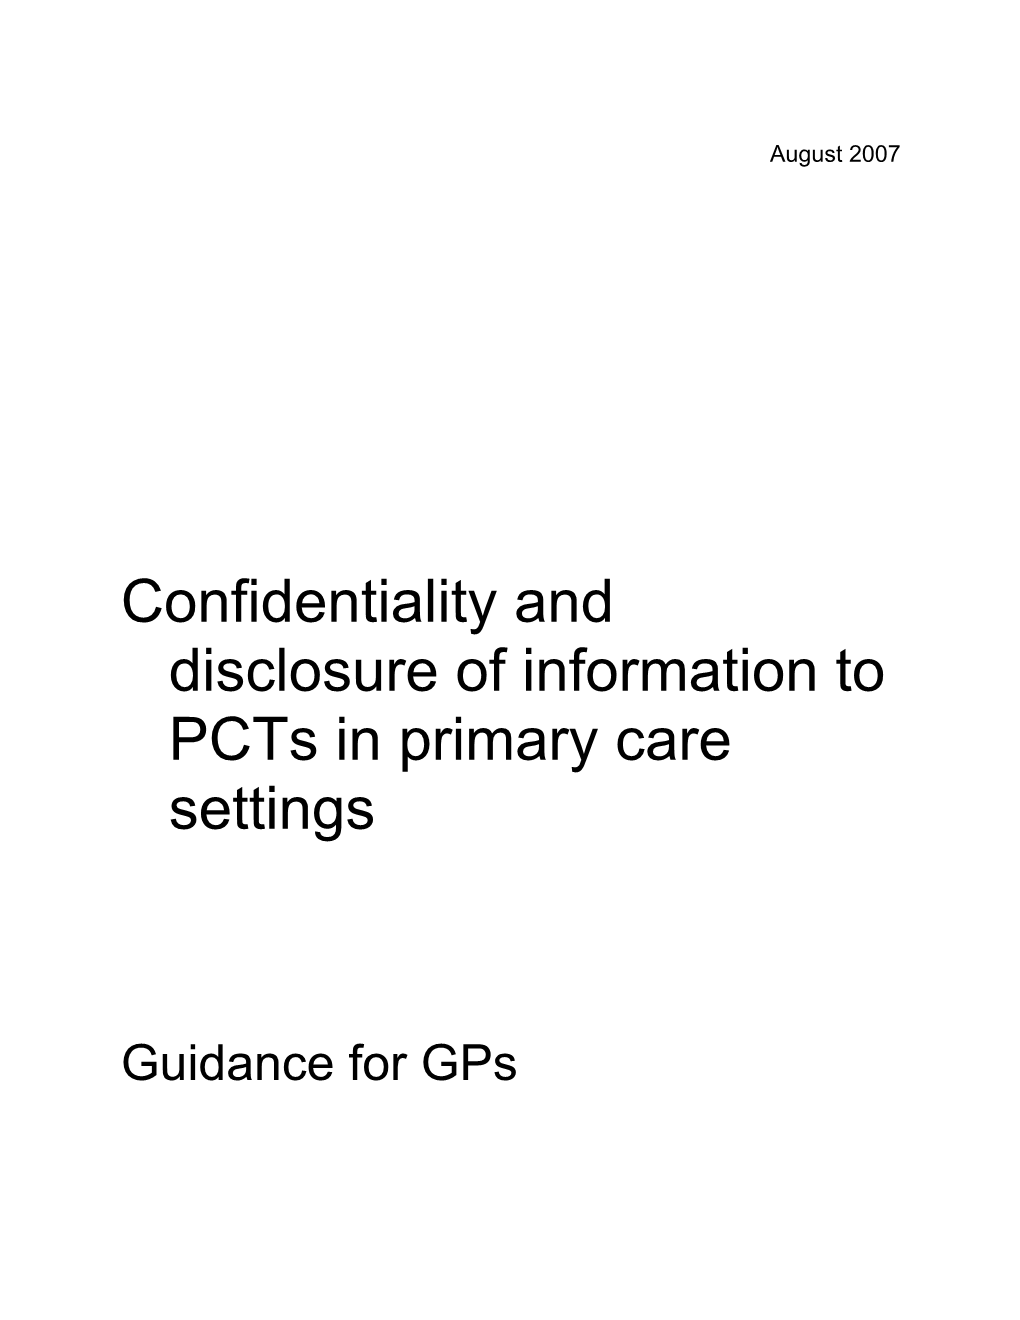 Confidentiality and Disclosure of Information to Pcts in Primary Care Settings